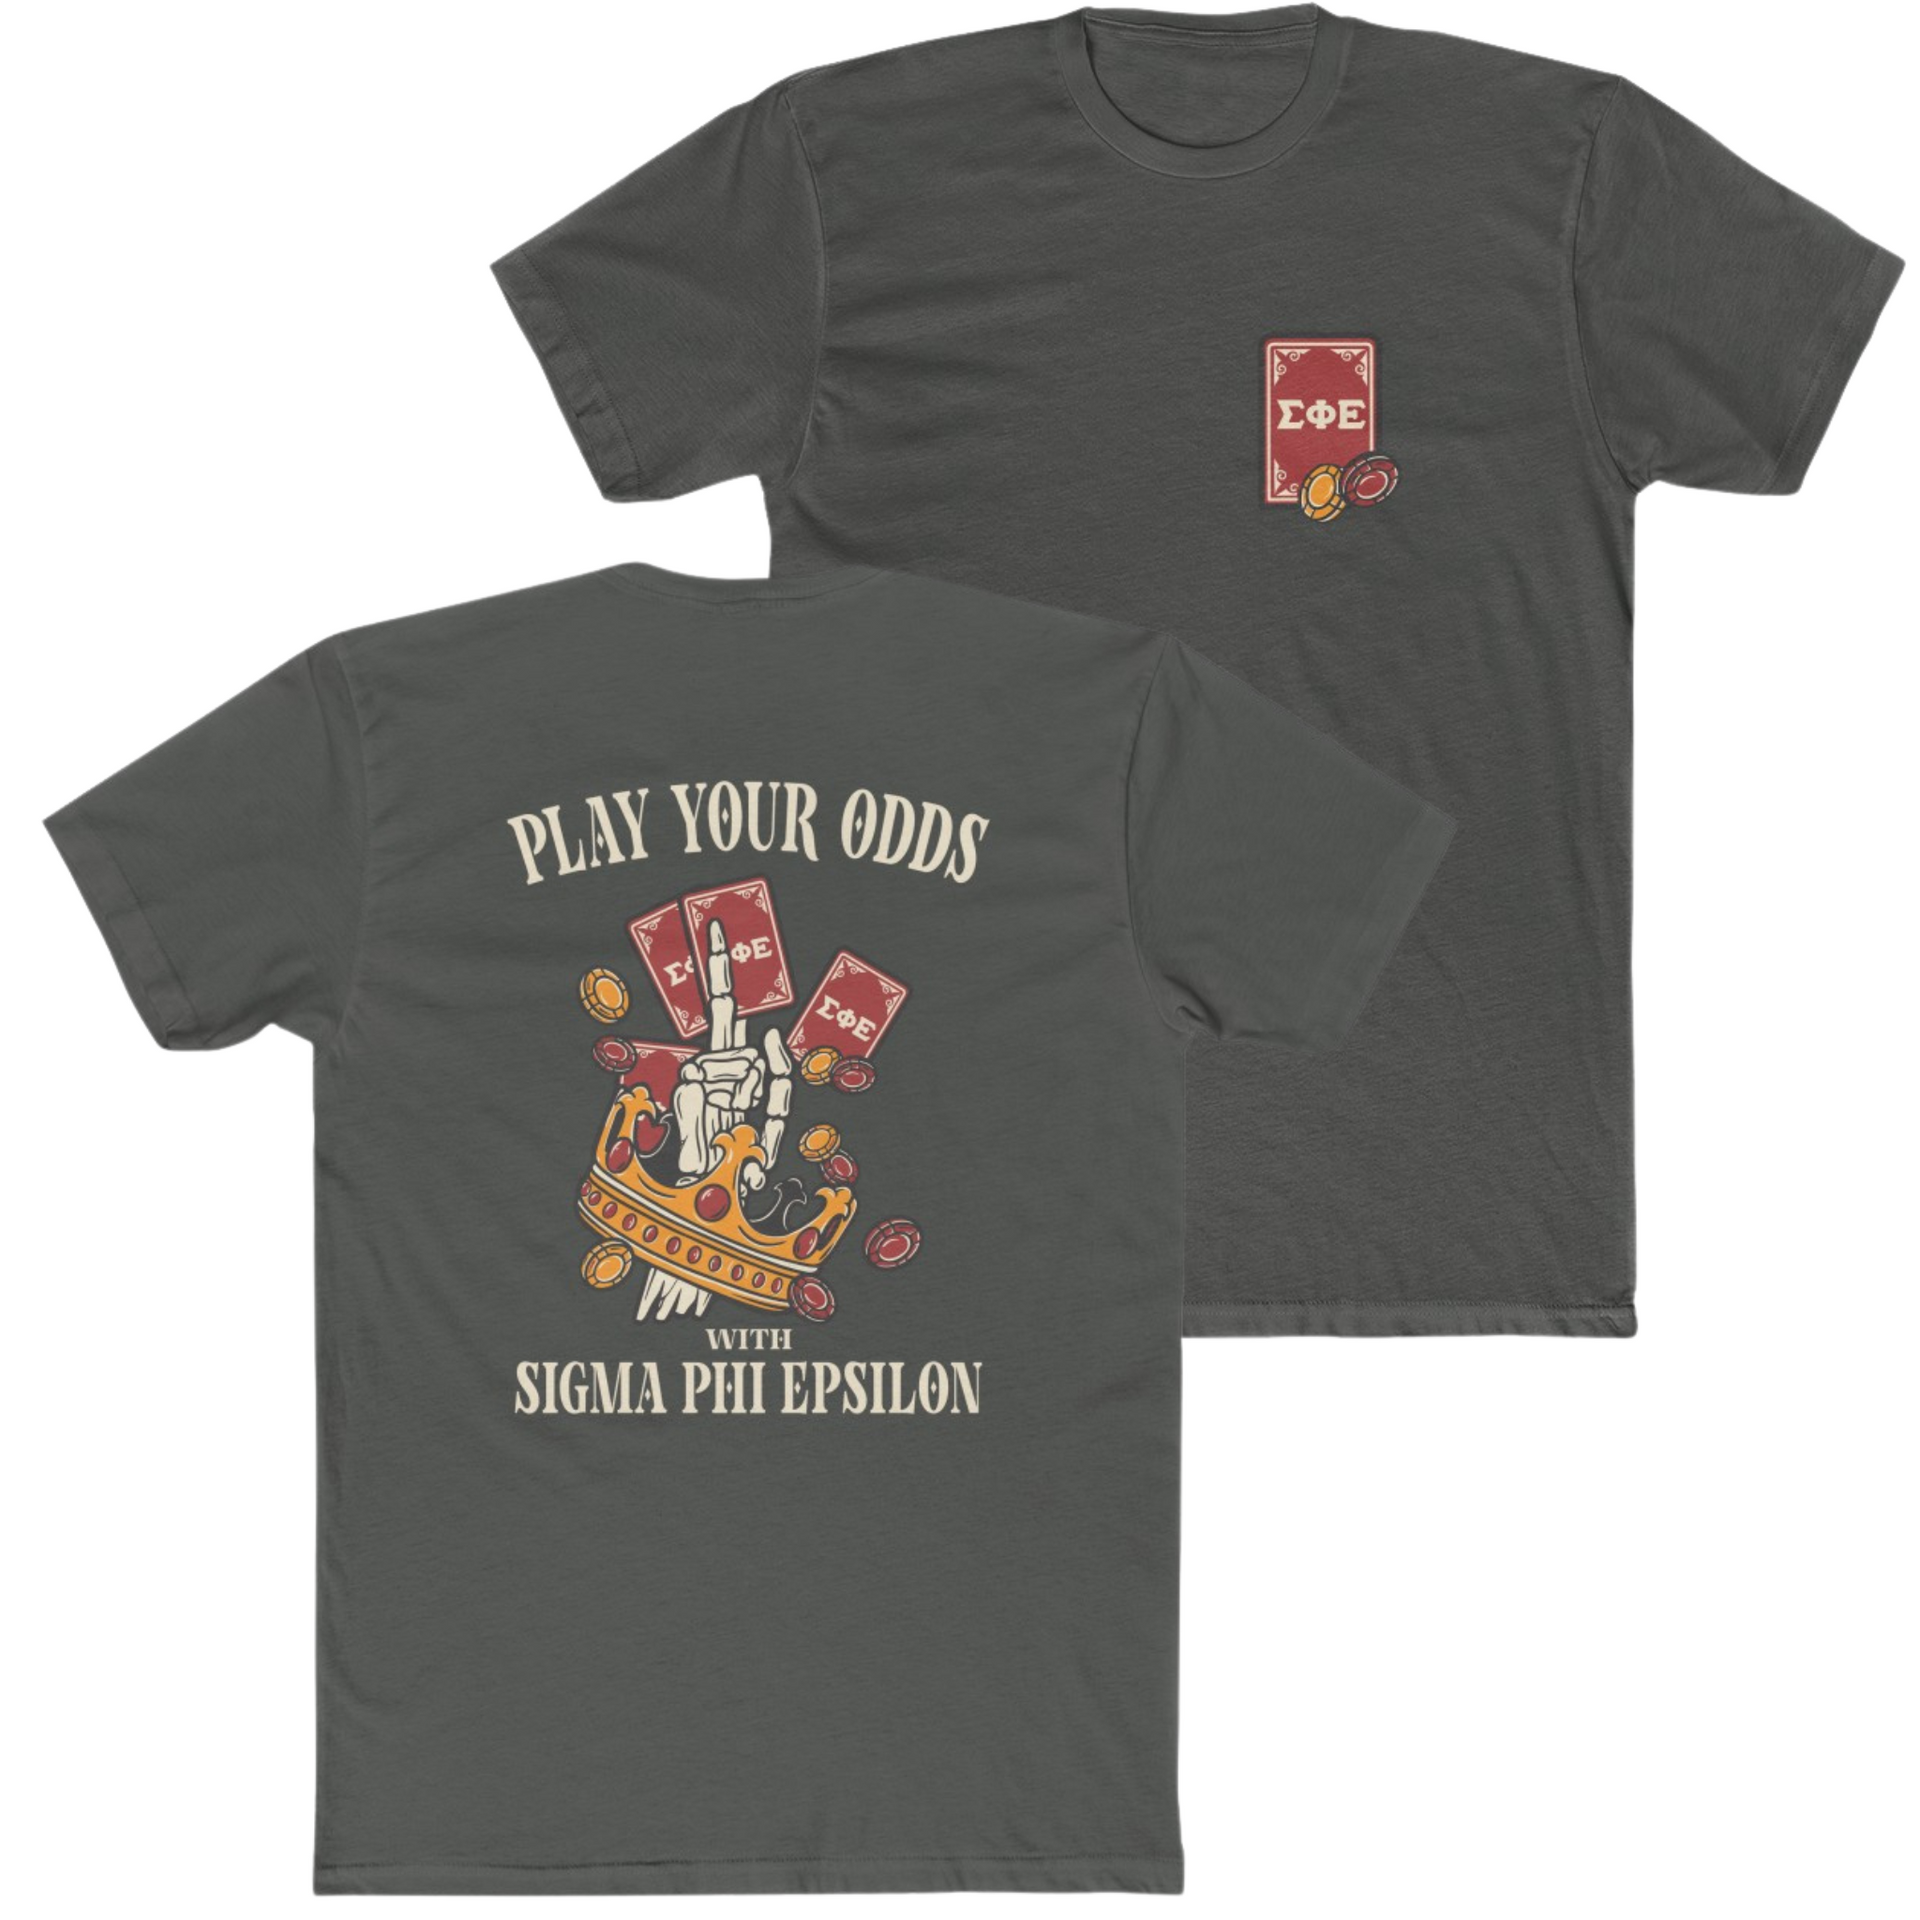 Grey Sigma Phi Epsilon Graphic T-Shirt | Play Your Odds | SigEp Clothing - Campus Apparel fraternity